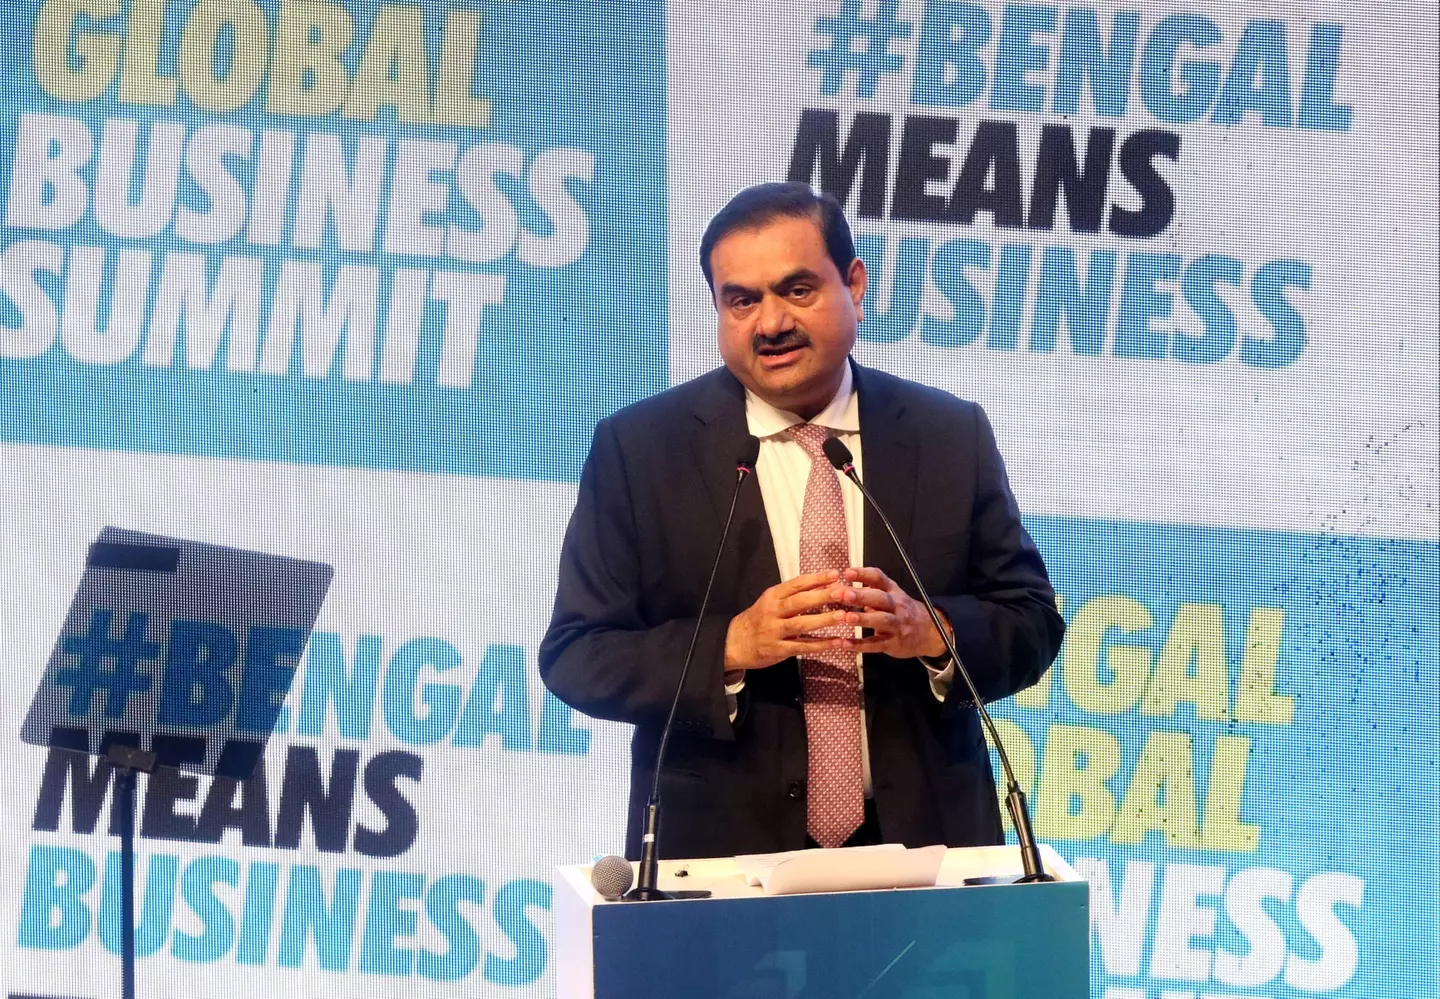 Gautam Adani is now in fourth place.